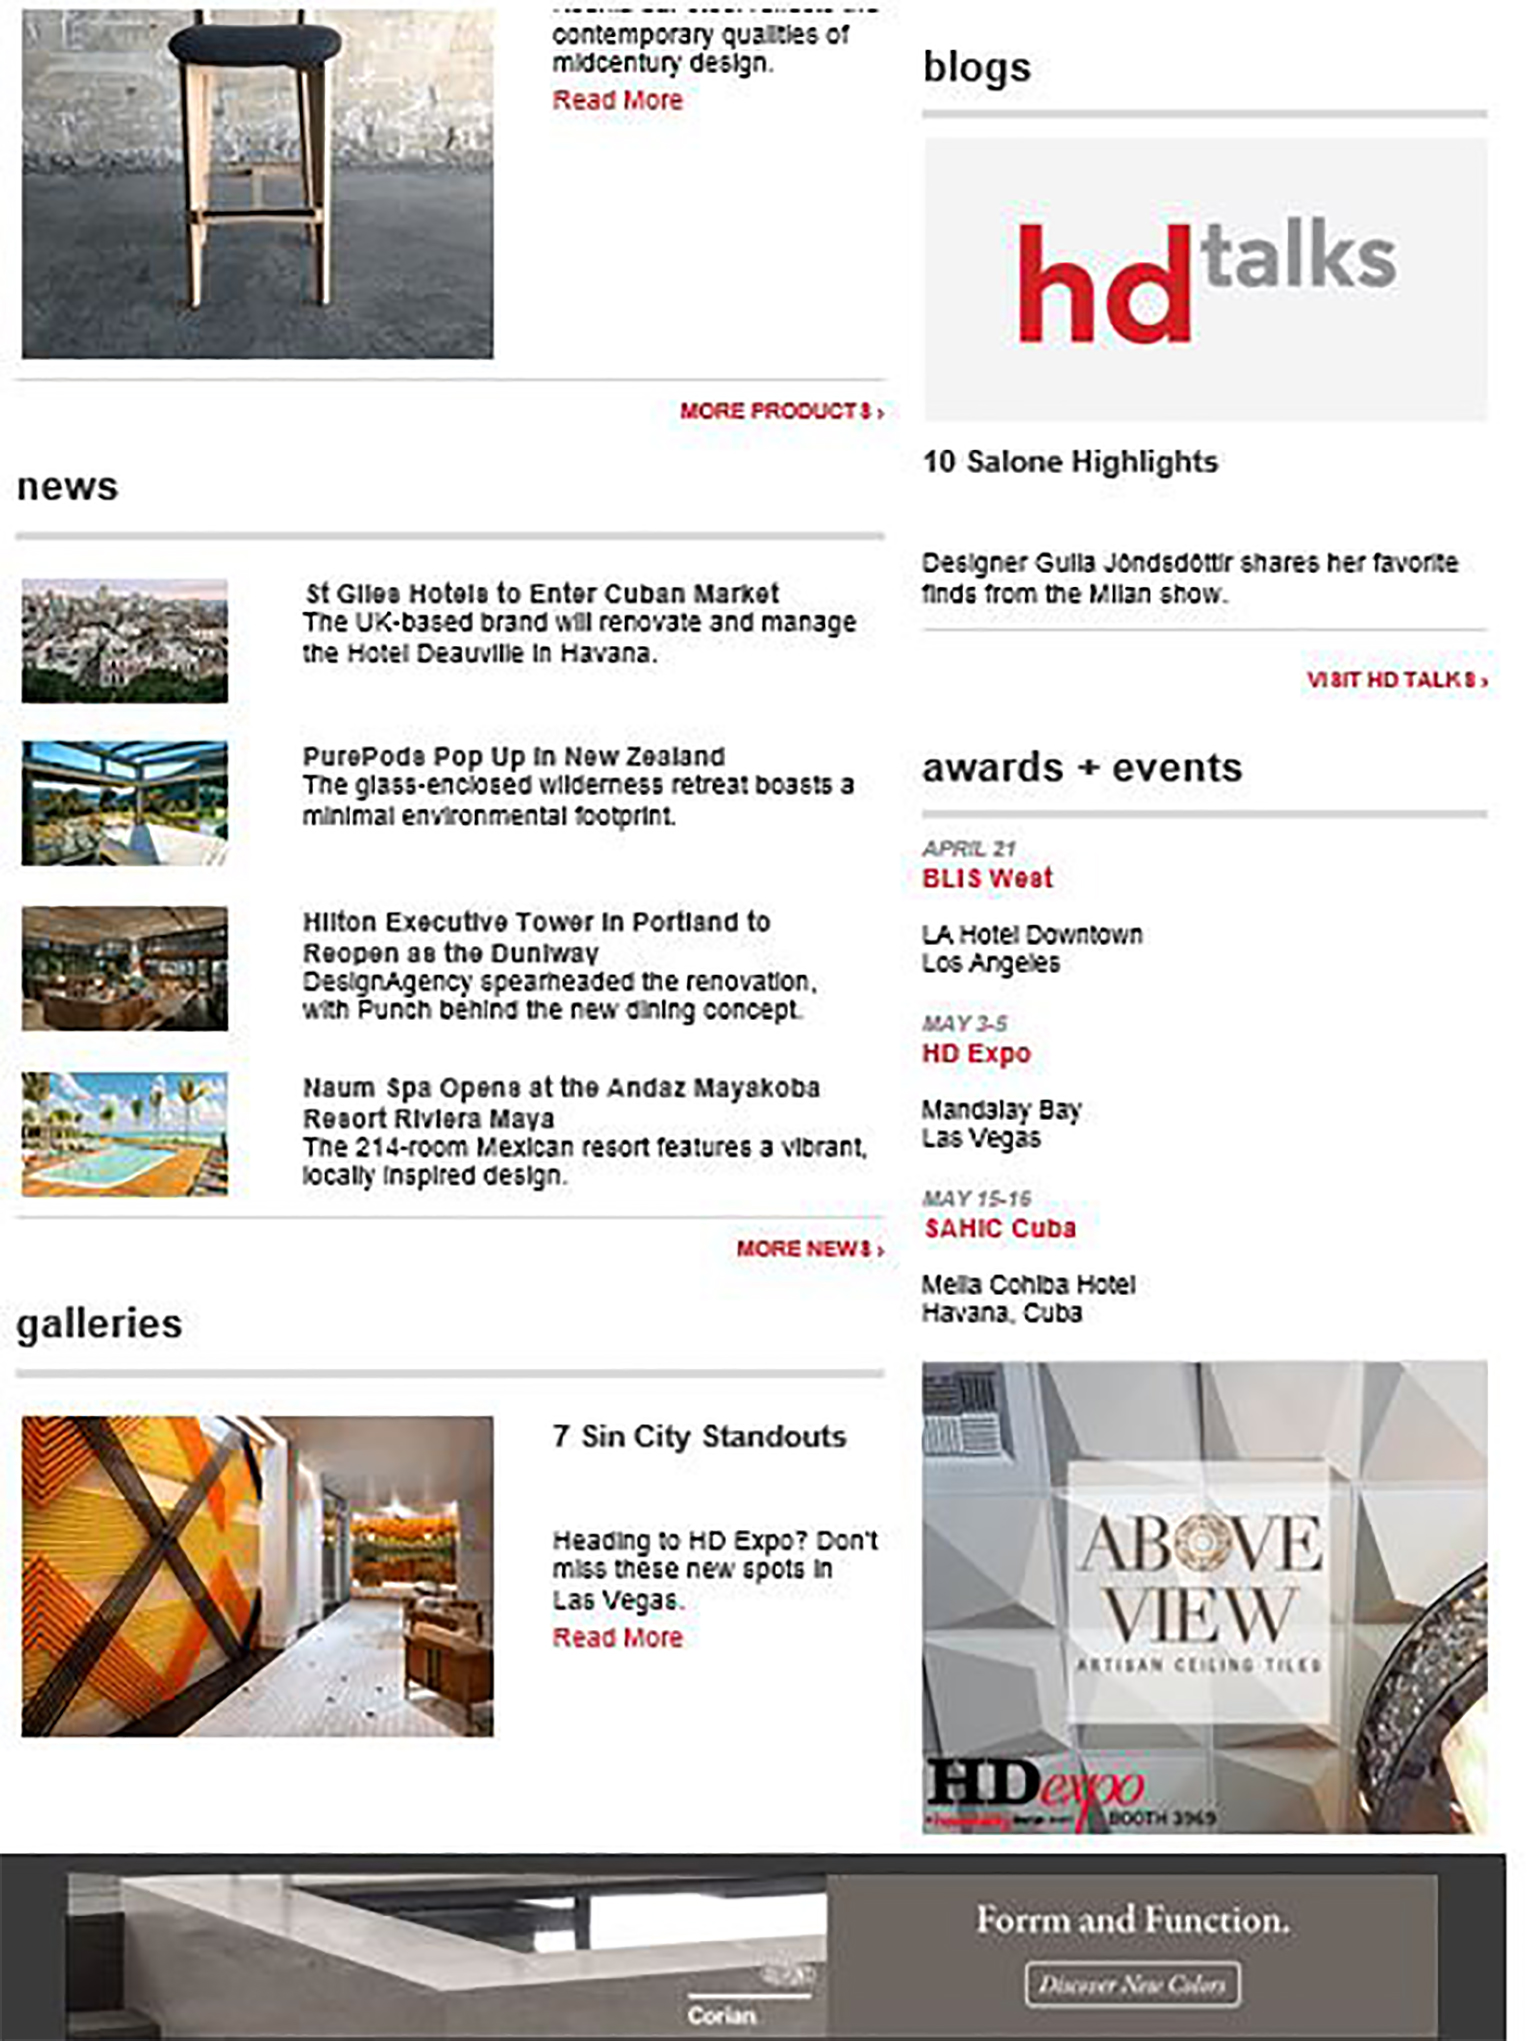 Hospitality Design, NOW Newsletter Email Ad, April 20, 2017